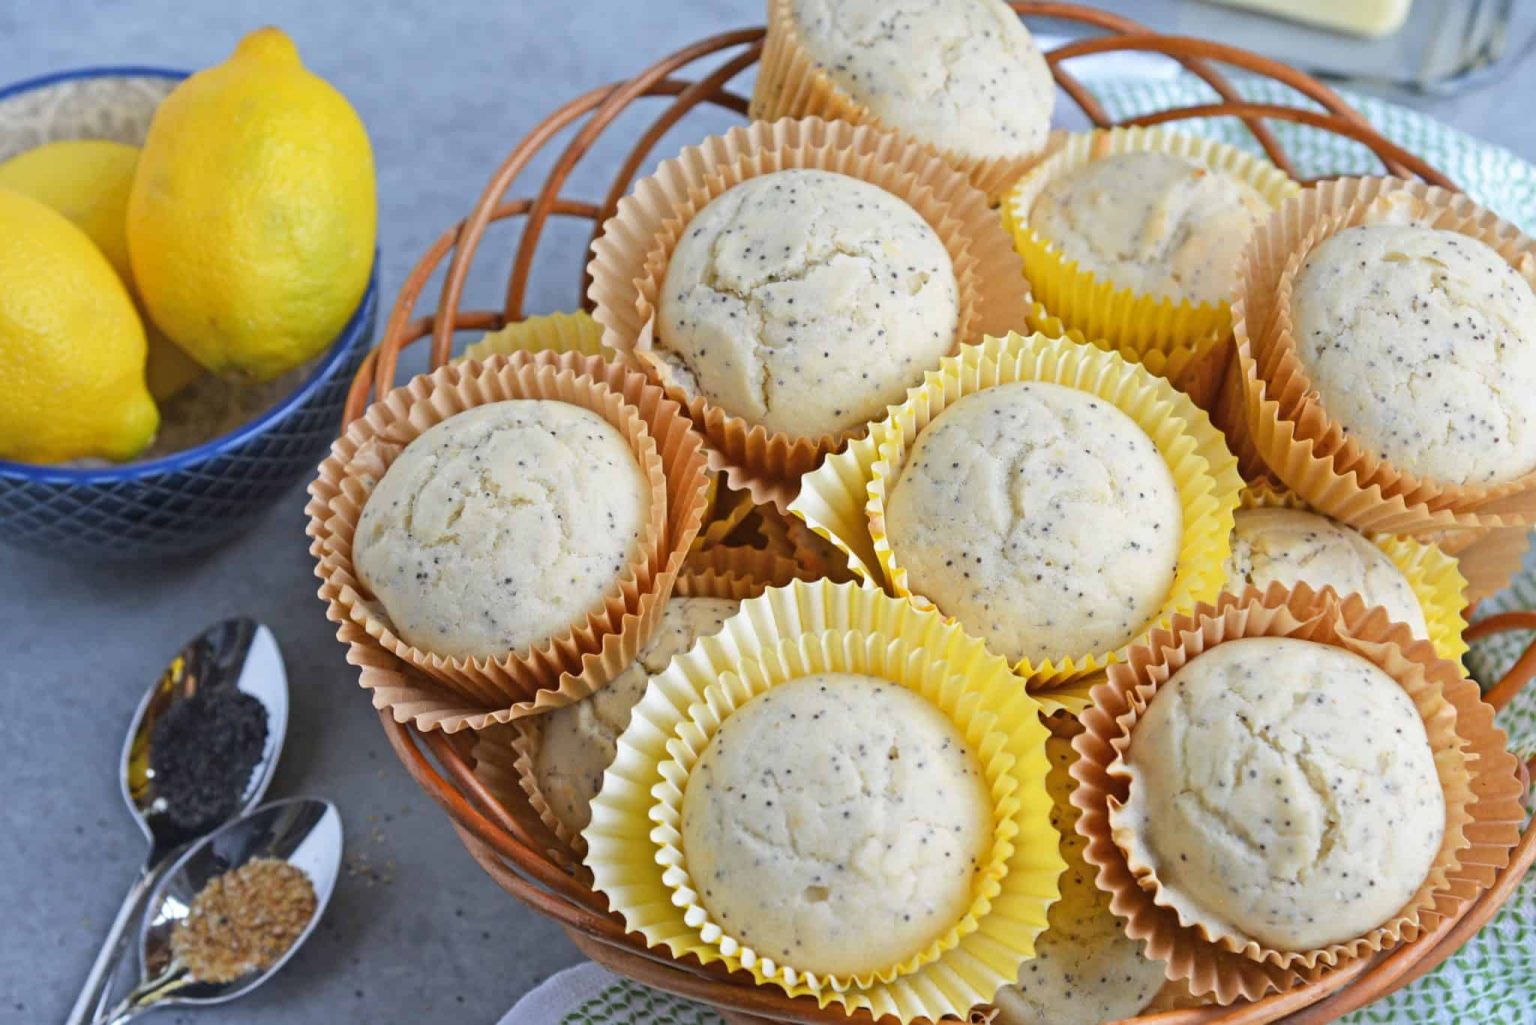 Lemon Poppy Seed Muffins - A Delicious Lemon Muffin Recipe